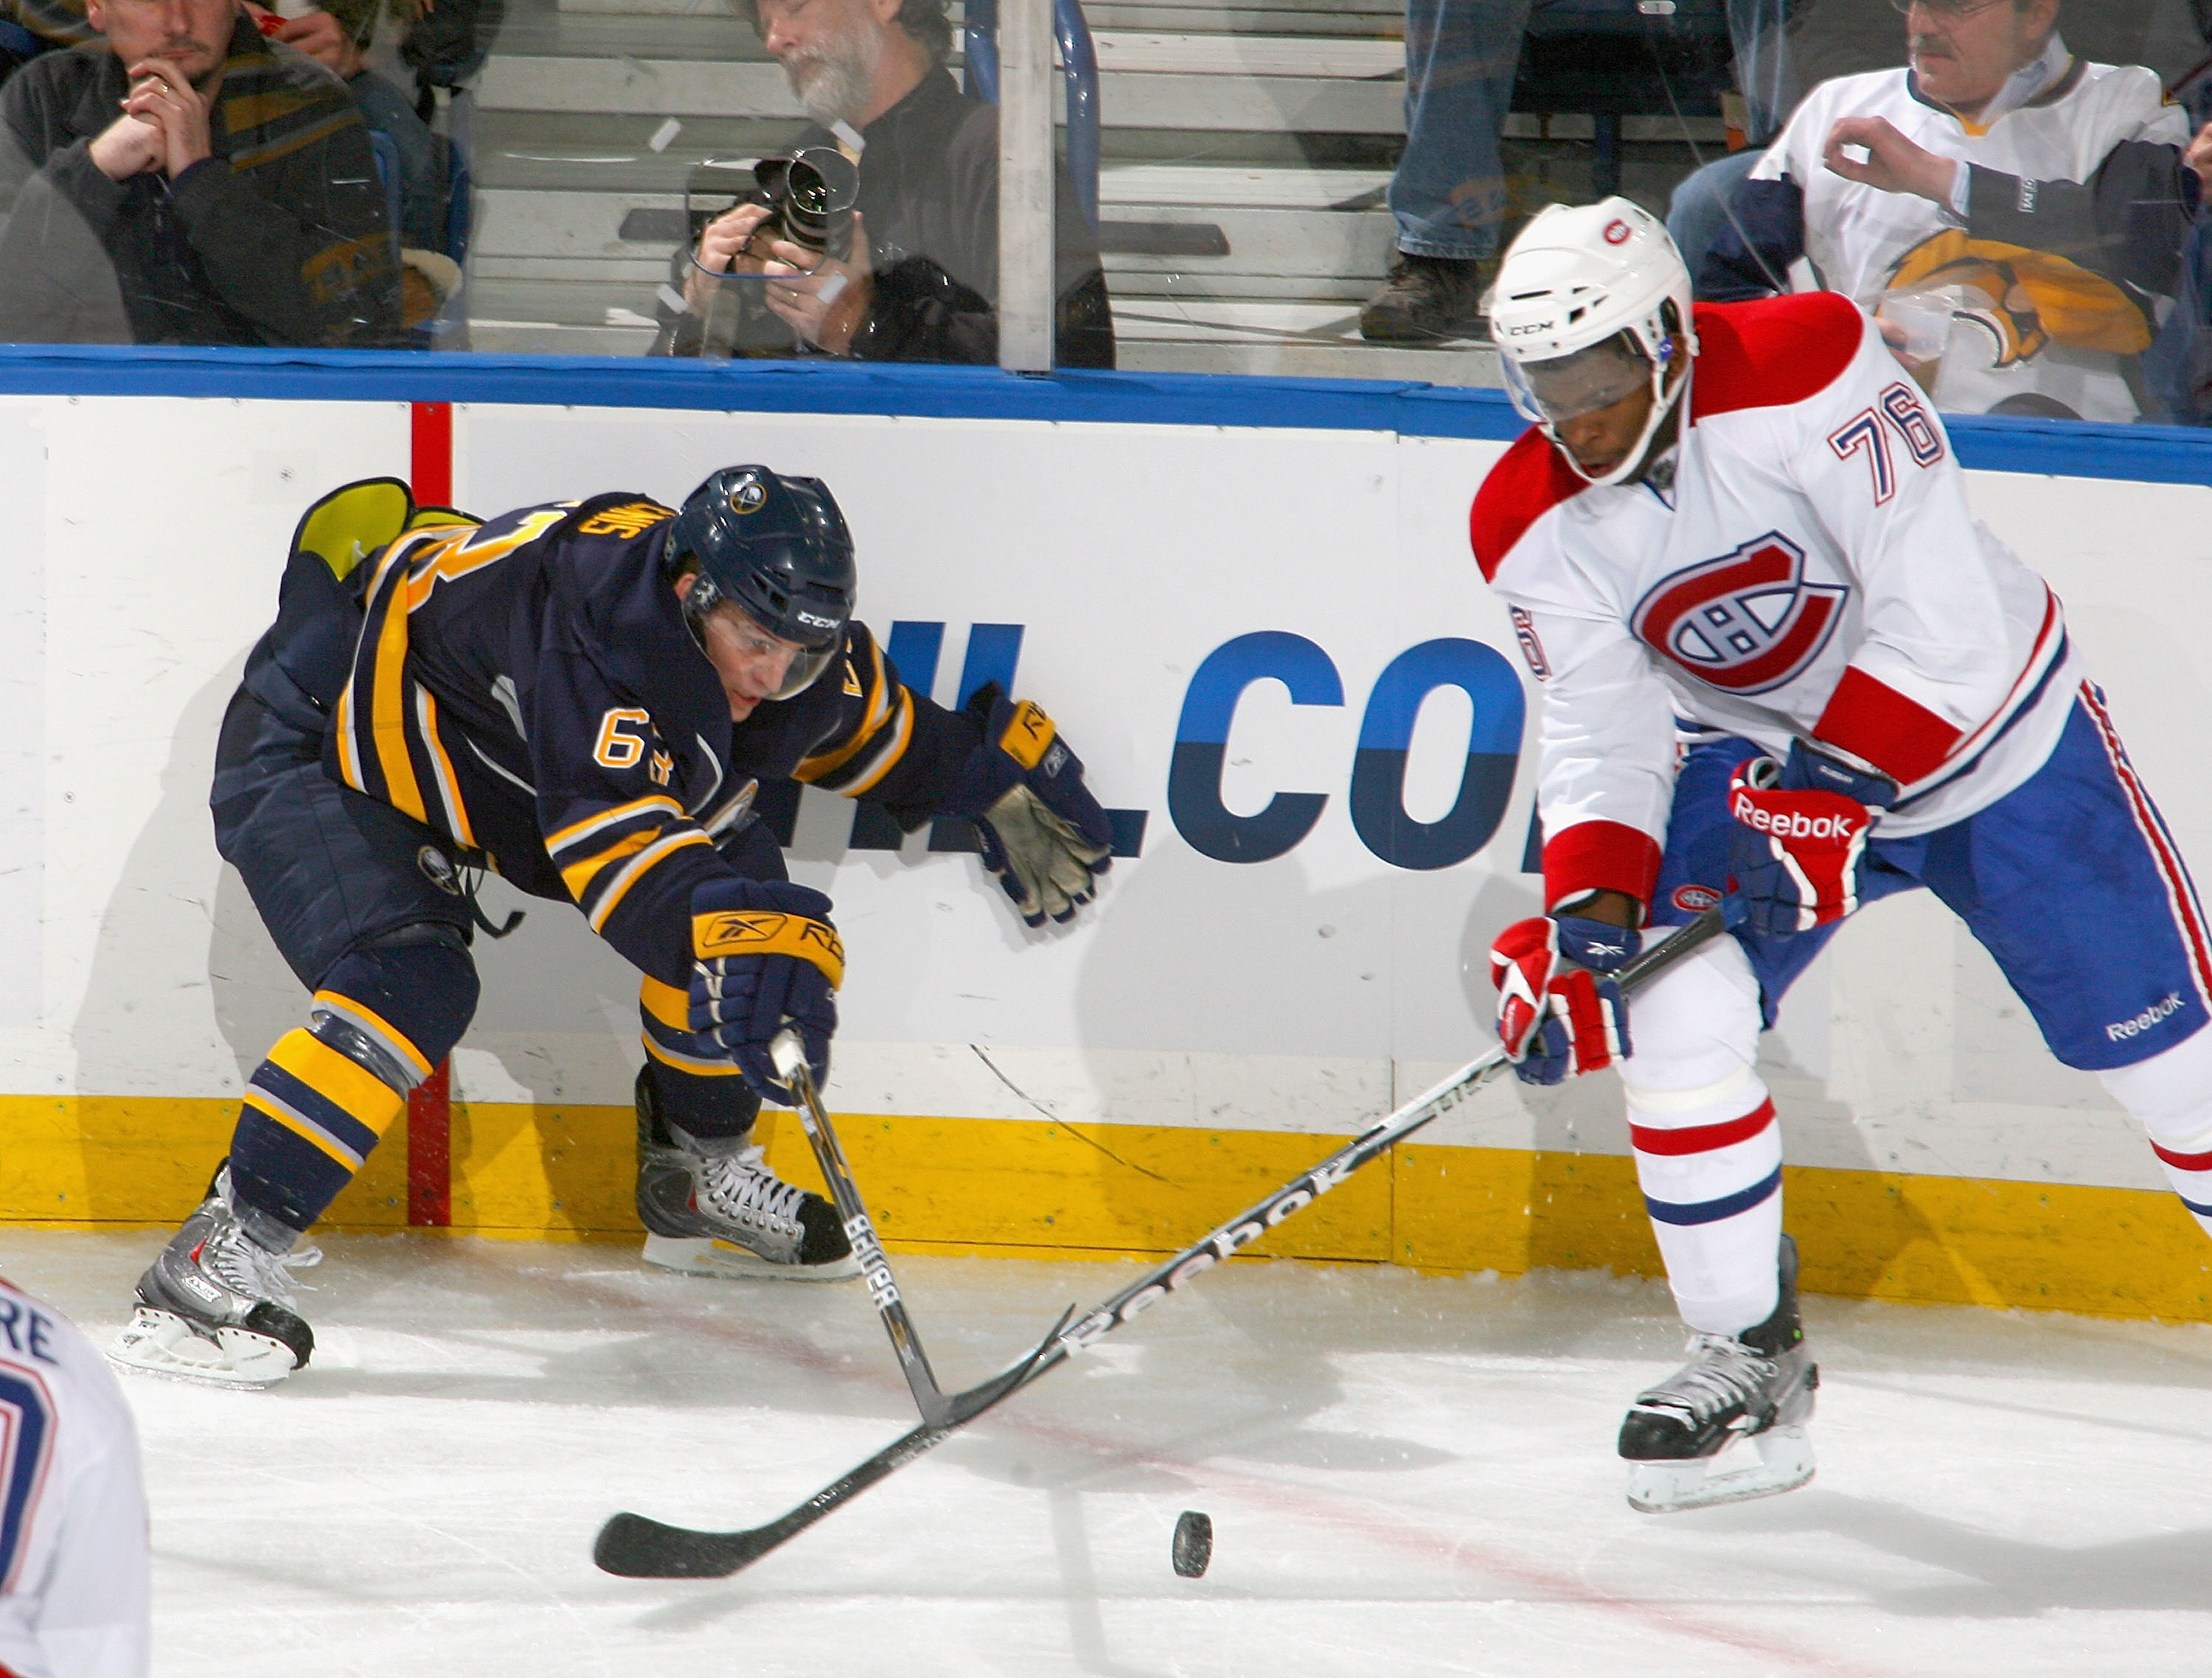 BUFFALO, NY - NOVEMBER 05: Tyler Ennis #63 of the Buffalo Sabres fights for puck control with P.K. Subban #76 of the Montreal Canadiens on November 5, 2010 at HSBC Arena in Buffalo, New York.  (Photo by Rick Stewart/Getty Images)